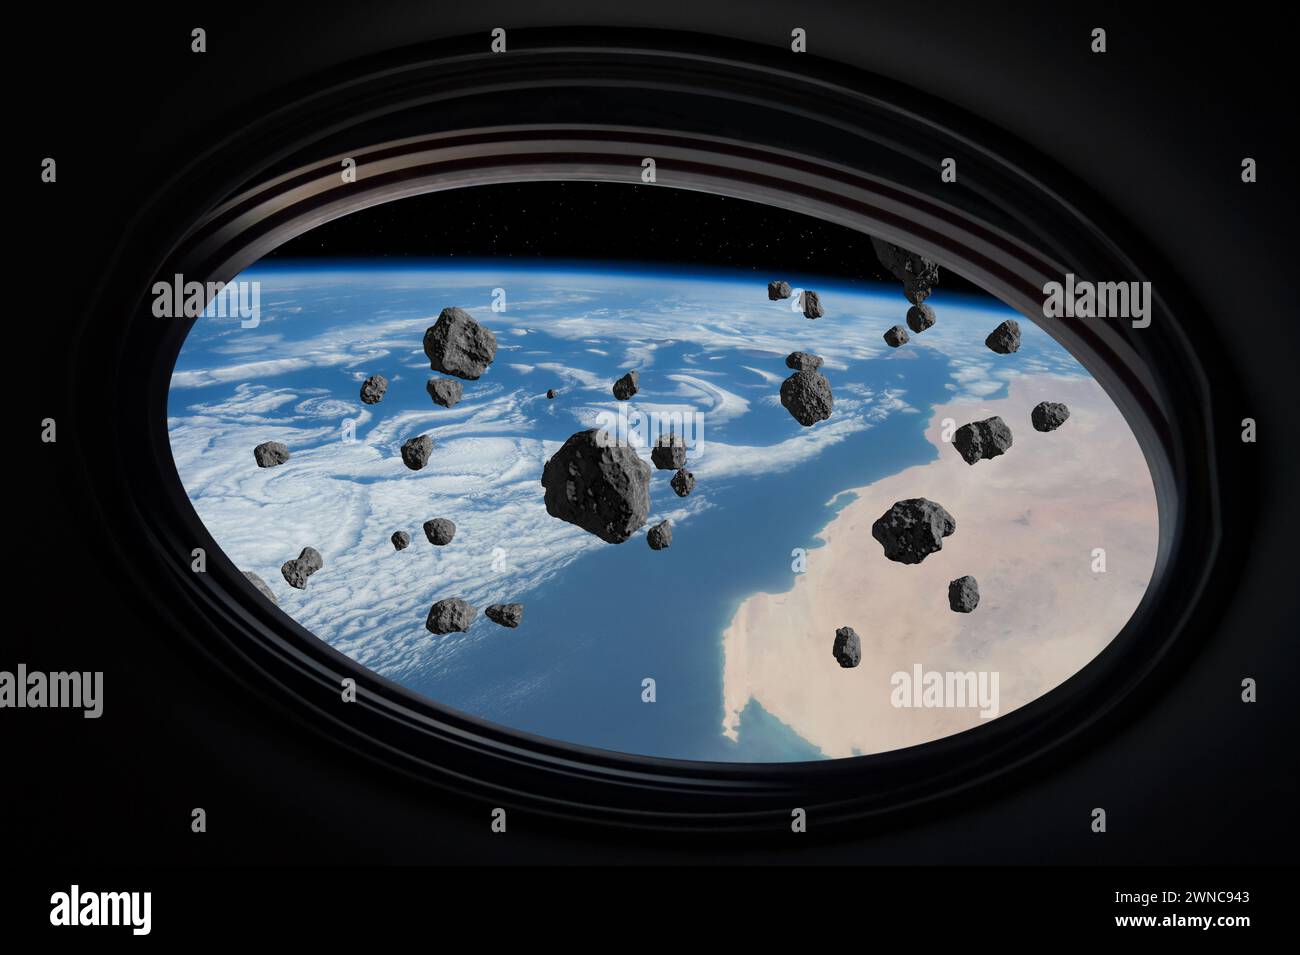 Spacecraft, Earth and asteroids. Asteroids fly over the Earth, as seen from the window of a spaceship. Elements of this image furnished by NASA. Stock Photo